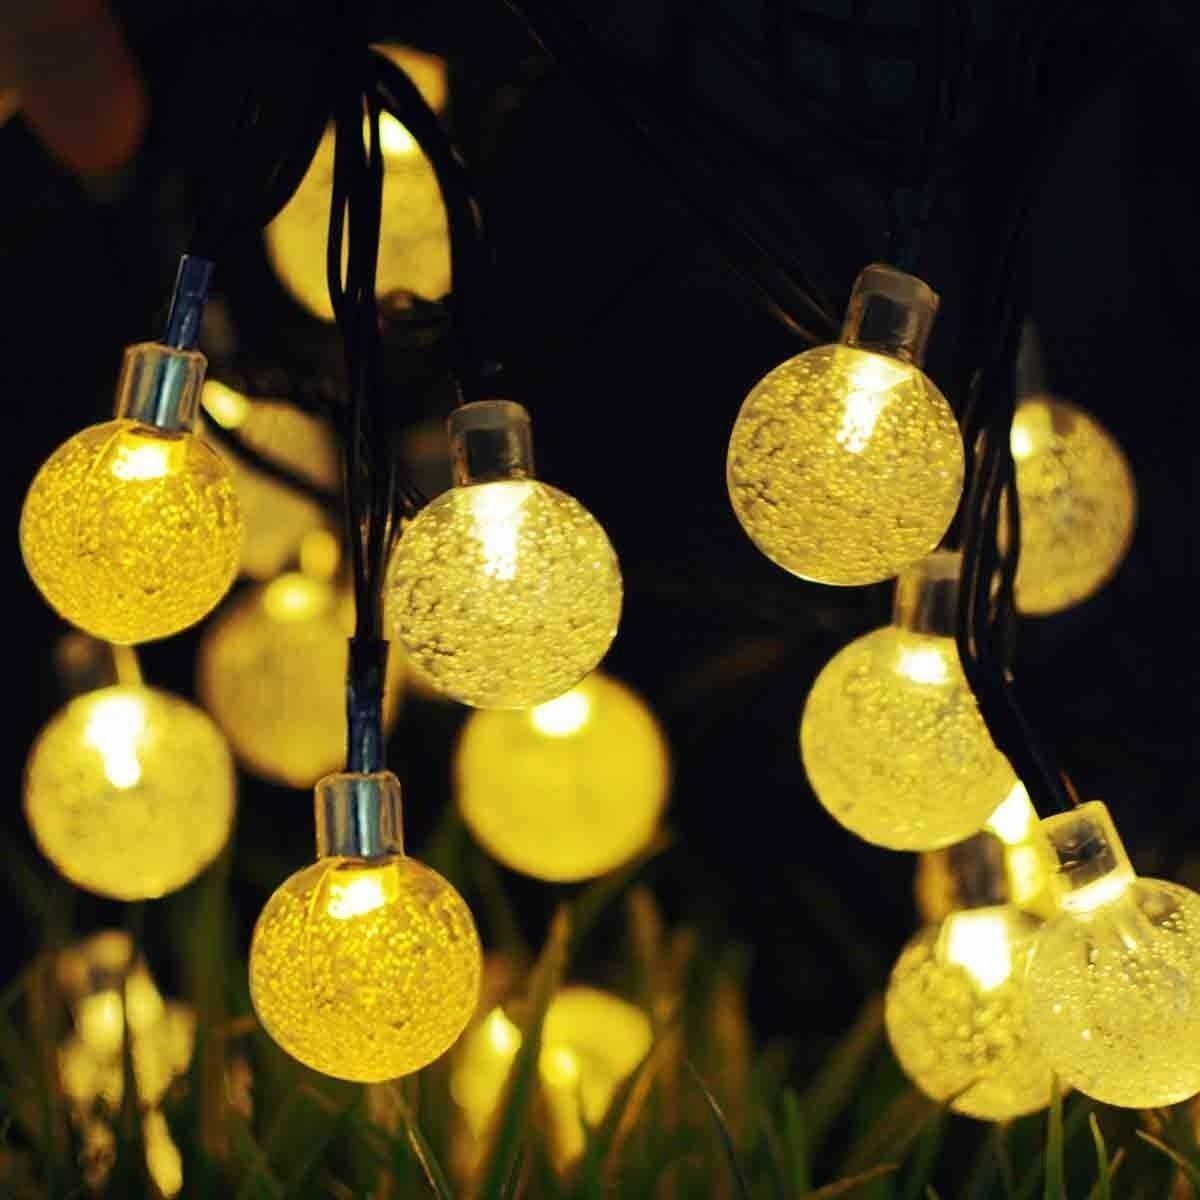 20ft 30 LED Solar String Ball Lights Outdoor Waterproof Warm White Garden Decor LINKPAL Does Not Apply - фотография #3